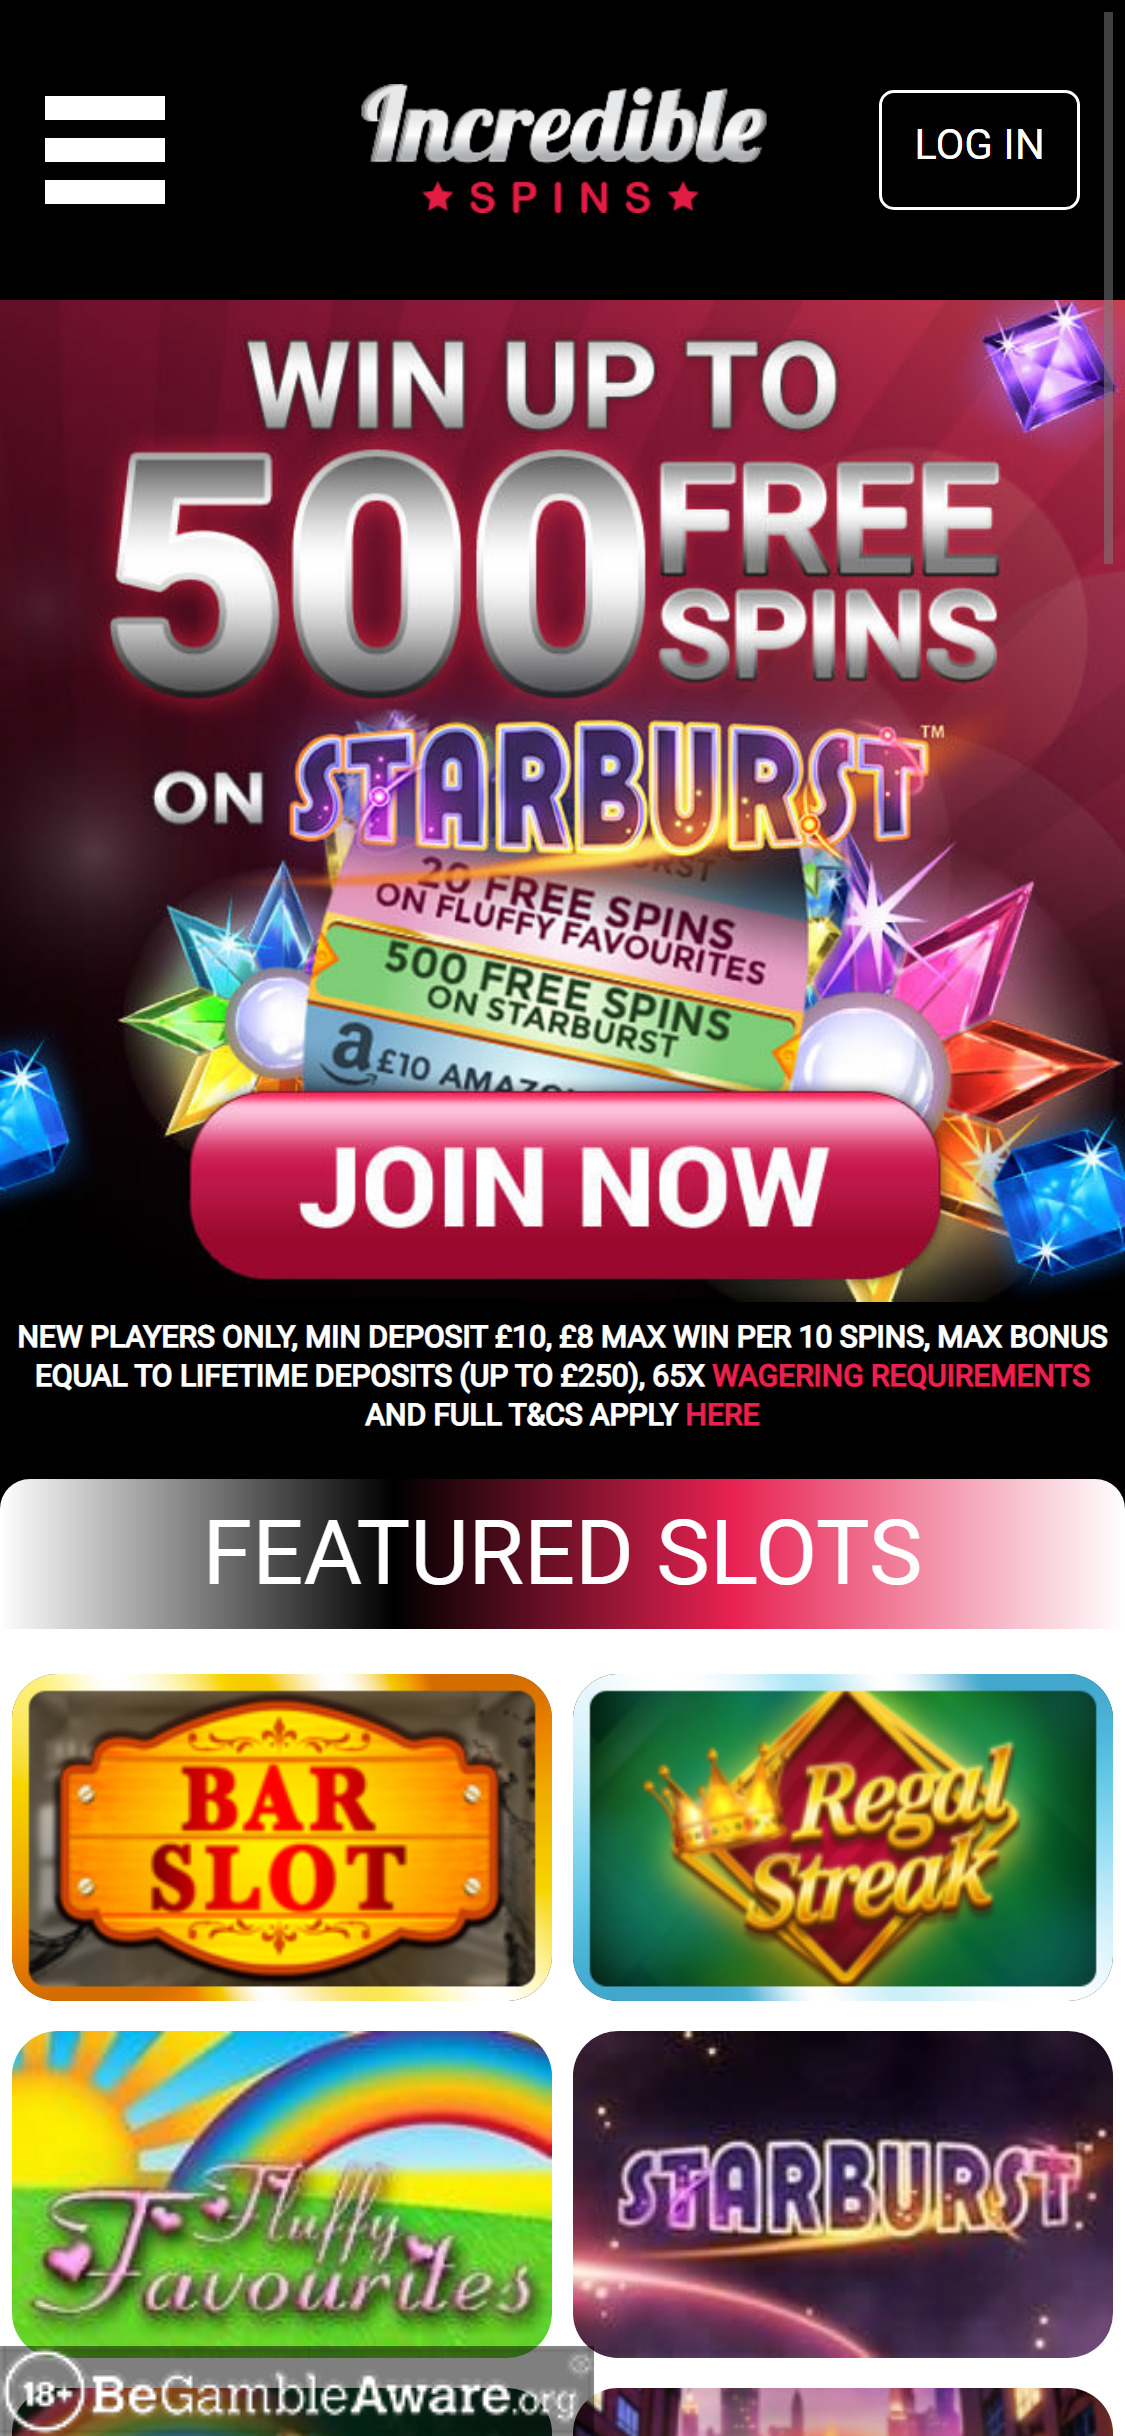 Incredible Spins Casino Mobile Login Review